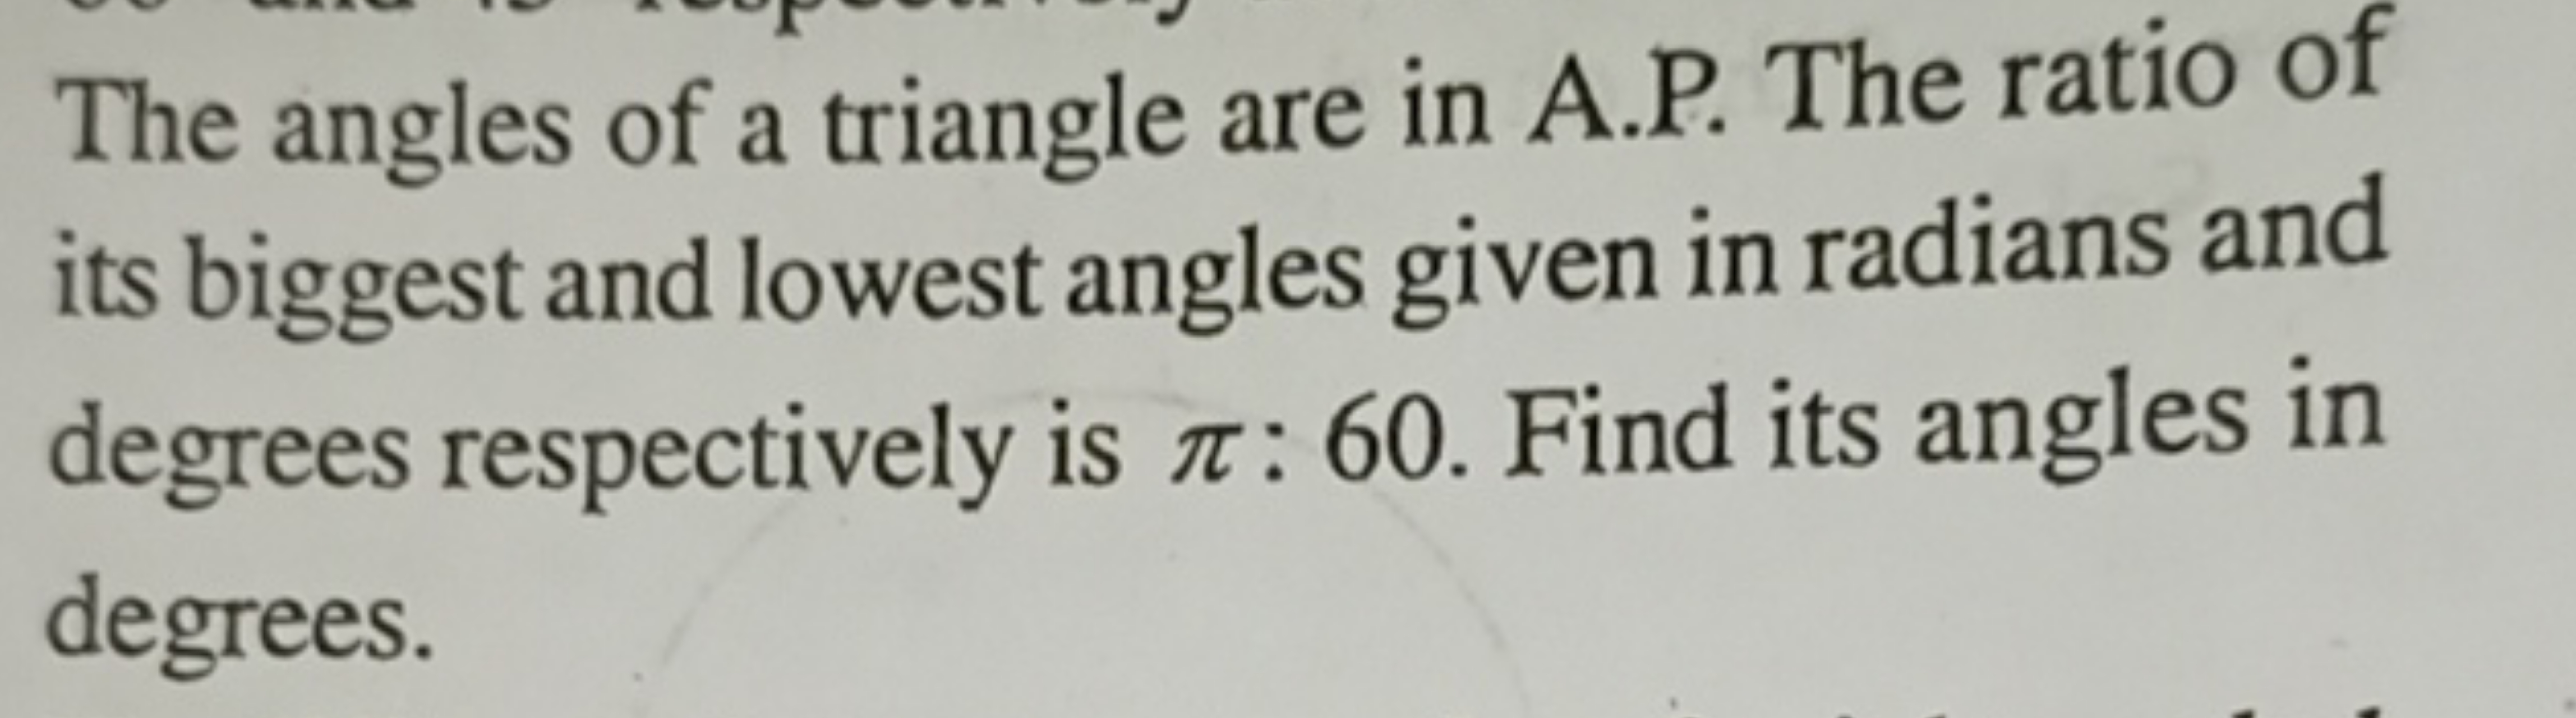 The angles of a triangle are in A.P. The ratio of its biggest and lowe